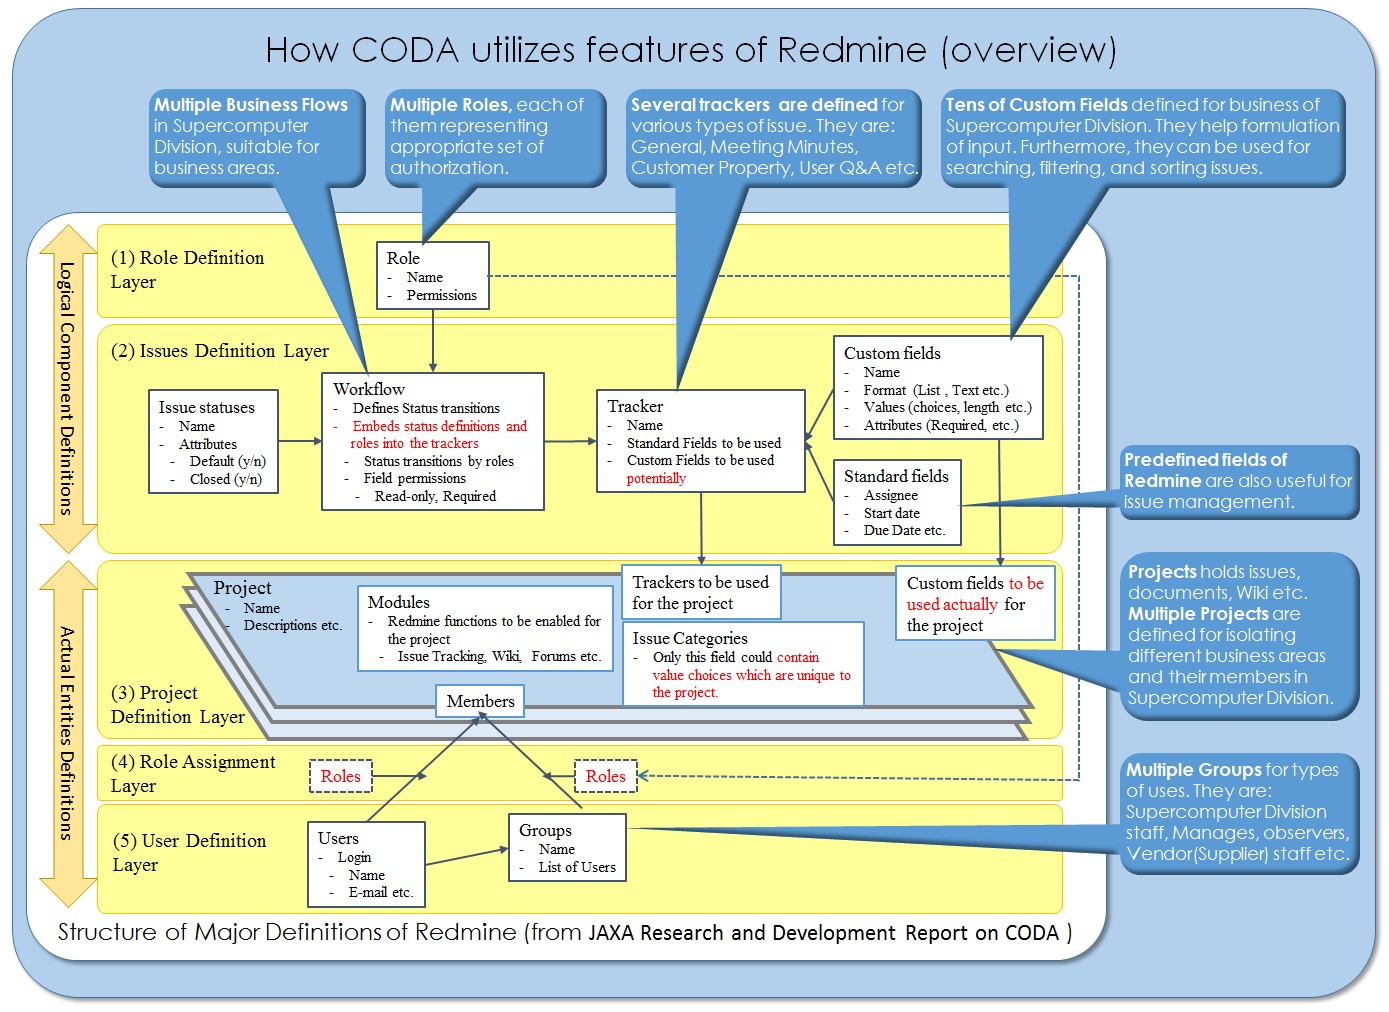 Structure of major Redmine components, surrounded by CODA's utilization of them